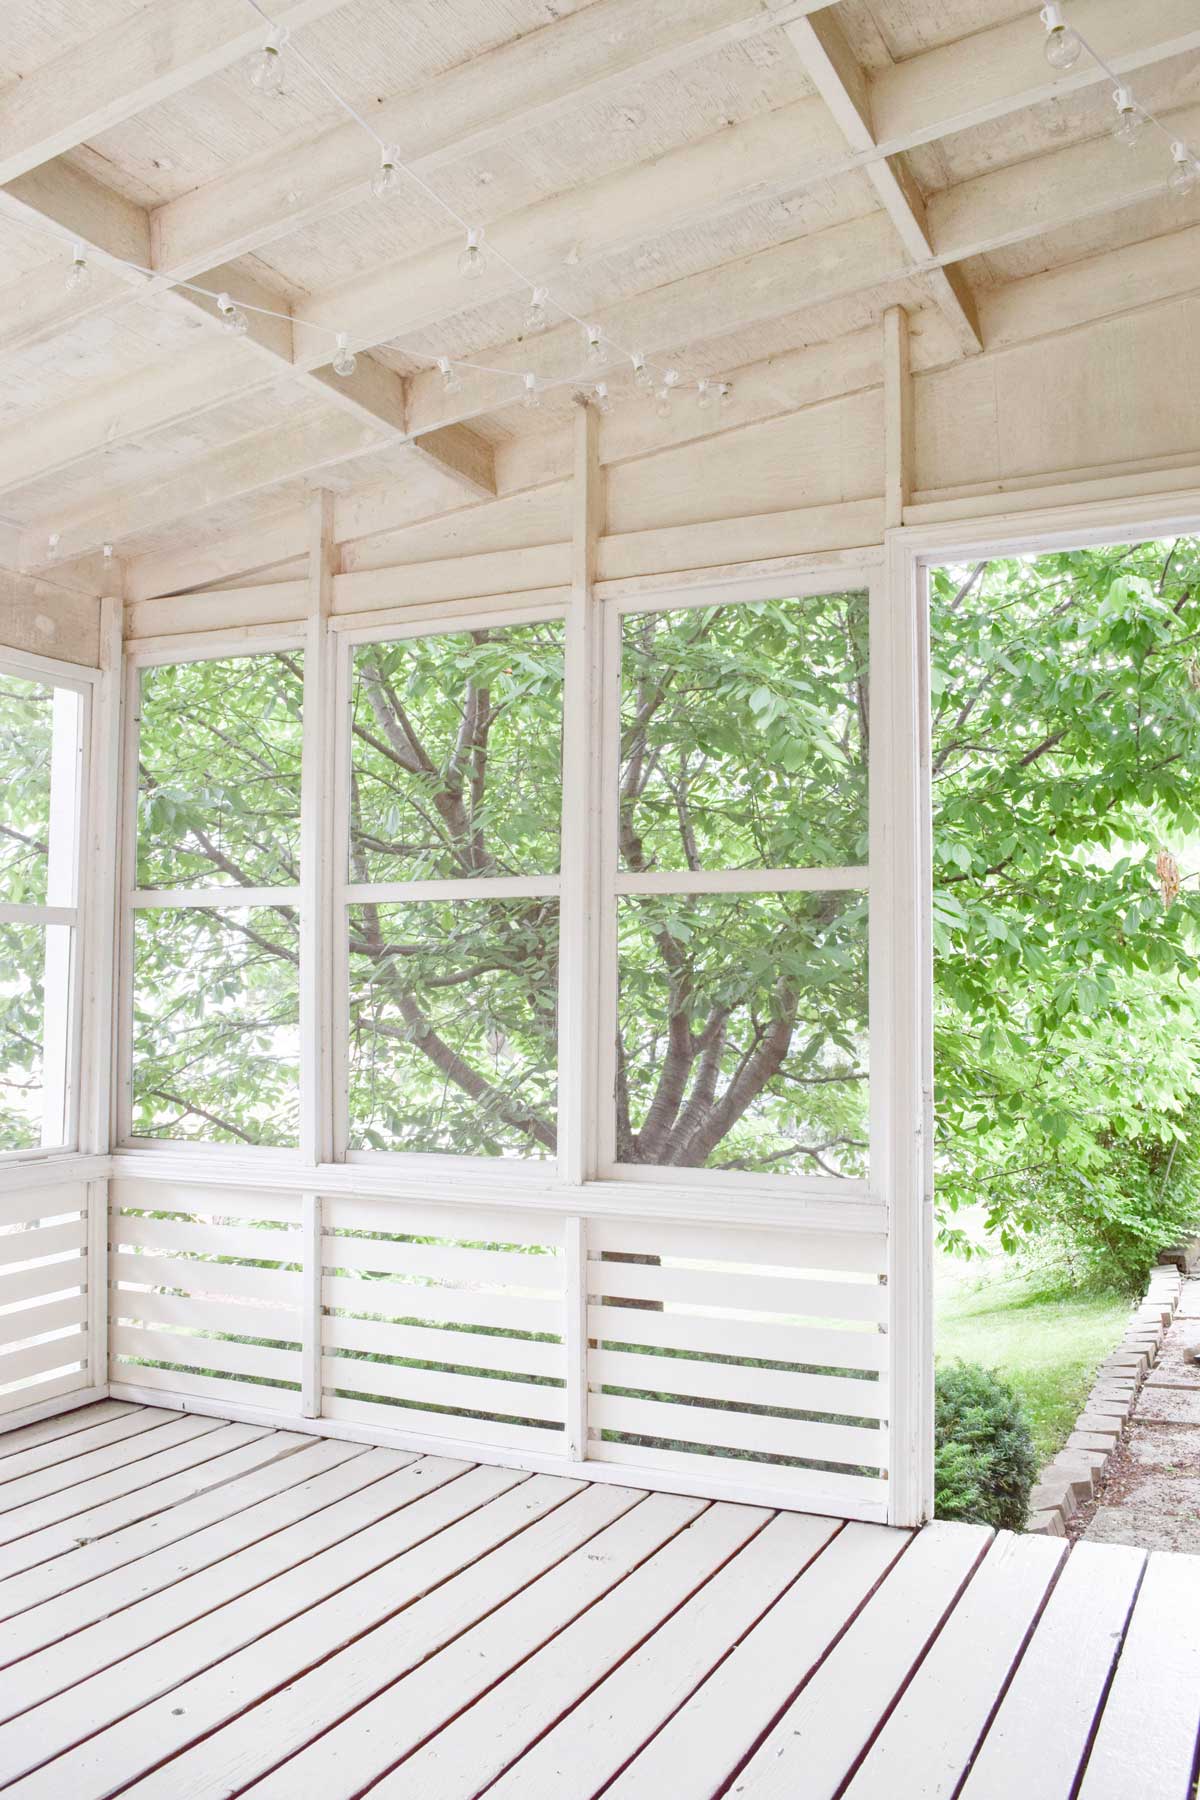 ADDING PANELING TO A SCREENED IN PORCH